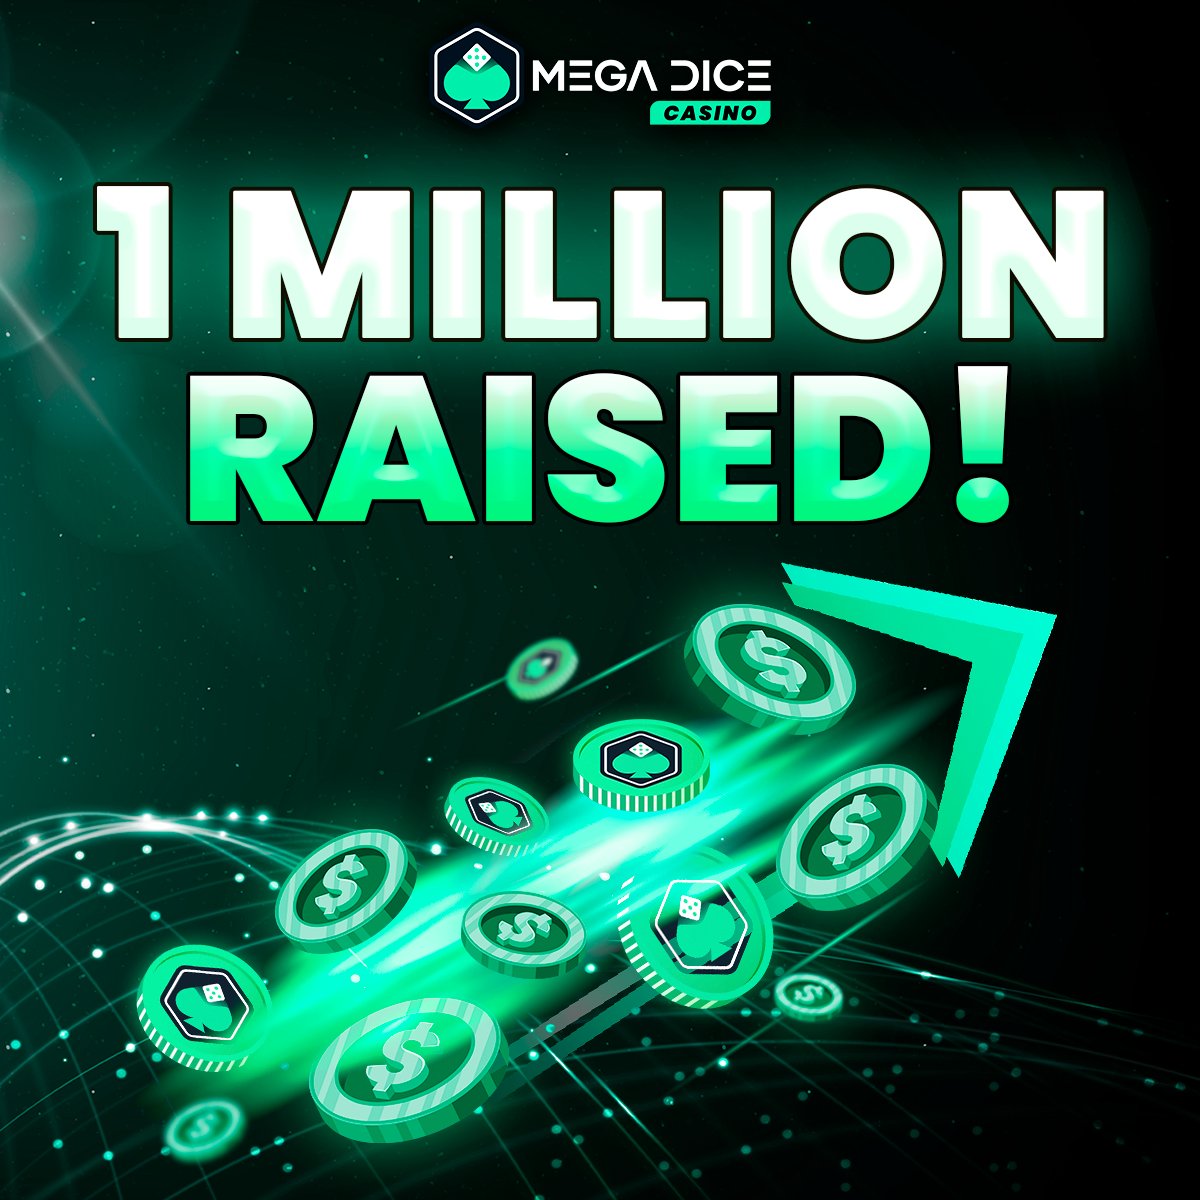 $DICE presale has raised $1 MILLION! 🚀🚀 This #MillionDollarMilestone brings us closer to revolutionizing GameFi. What's coming next?👇 Next tier price: 0.075 💰 Next presale target: $2M 💰 We're implementing multiple tiered price increases, so make sure to secure your $DICE